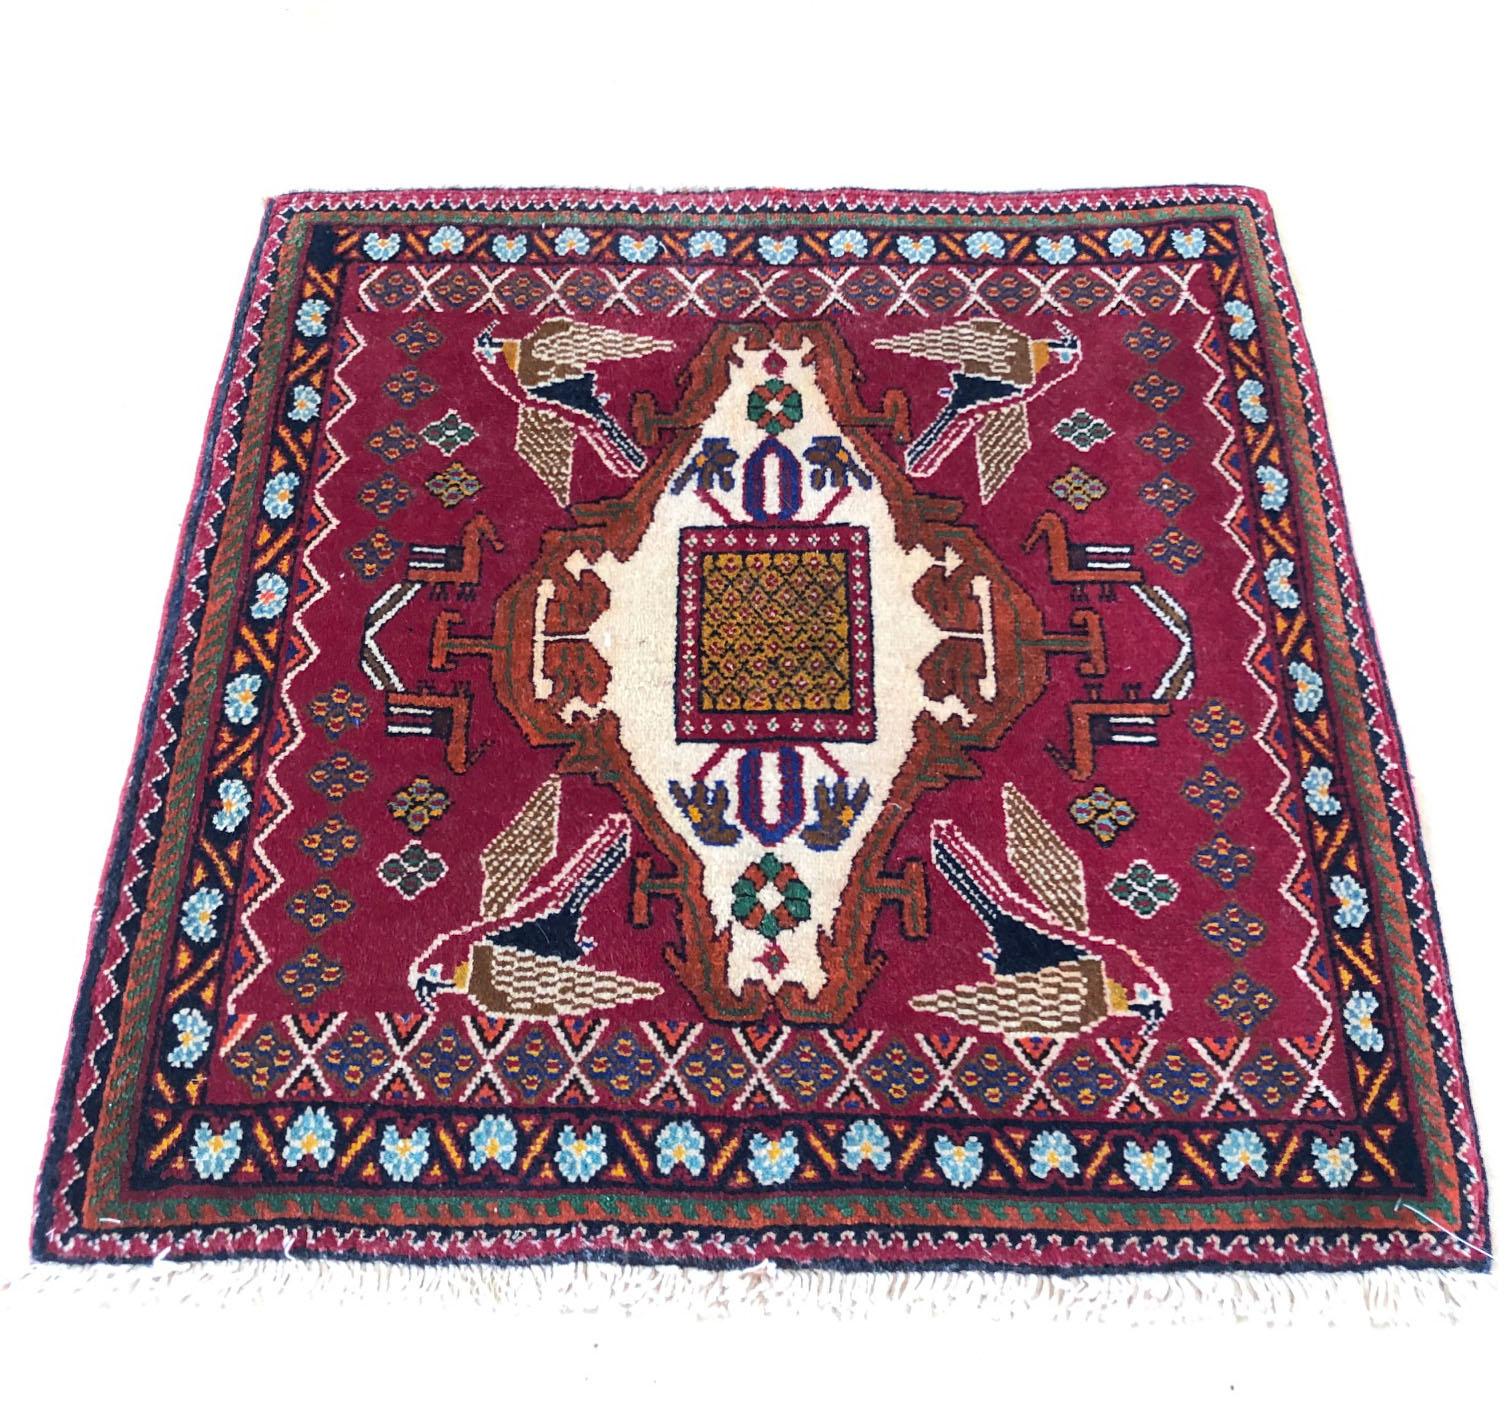 This authentic Persian Ghashghai rug is recognized by its joyful and bright color with geometric design. This rug has designed with tribal flowers and birds motifs. The size is 2 feet 3 inches wide by 2 feet 3 inches tall. The pile is wool and the